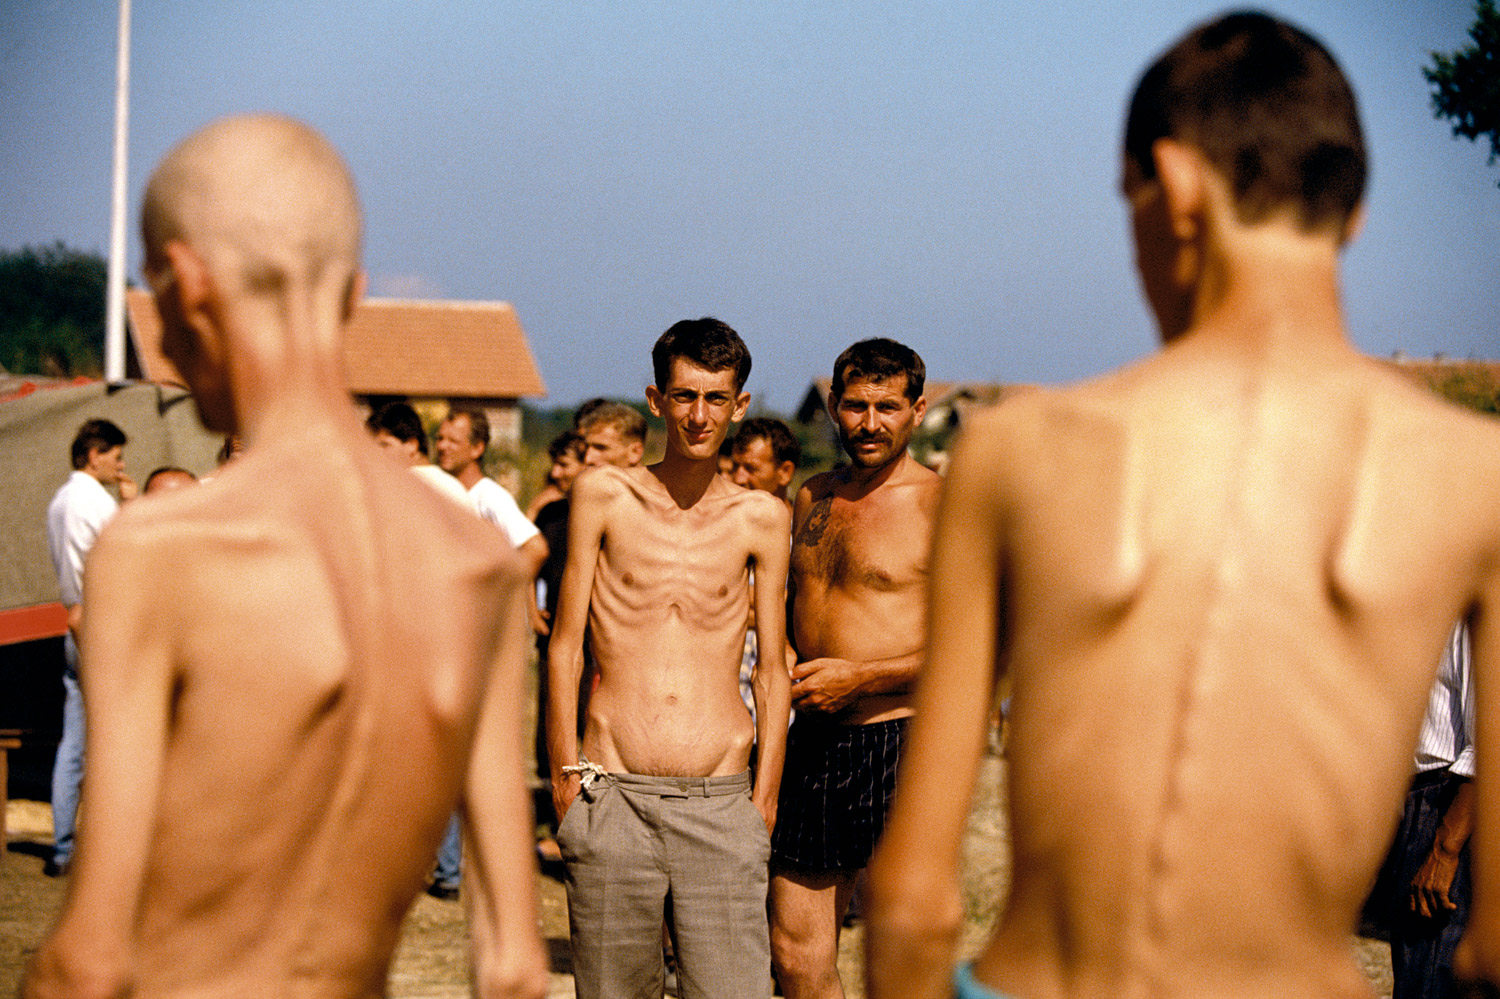 August 1992. Trnopolje. When several journalists broke the story of the Serbian prison camps, there was a huge outcry in the world. Immediate comparisons to Nazi concentration camps were invoked and a demand for investigations and intervention were discussed. I was working on the Bosnian Serb side at the time trying to understand the war from their perspective as, like all wars, nothing is completely one-sided. However it was extremely difficult to work as it appeared the Bosnian Serbs didn't understand or care about journalism and the flow of information even when it was to help people understand them.I asked a Bosnian Serb Army officer if I could go to a front line near where they had recently lost ground and show the effects on their civilian population. He quickly said no but said if I wanted I could go to visit the prison camps in order to see they really weren't as bad as people thought.To this day I am not sure if the Bosnian Serb leadership made a brilliant short-term public relations move or just created a long-term accusatory piece of evidence. After my trip to several camps, TIME published the images and the outcry was as to be expected. Brutal images harking back to World War II but now in color and in the 1990s were shocking to all. But the shock quickly wore off and people really didn't care. Some camps were closed while new ones on all sides opened and the story in the immediate sense disappeared. But now 20 years later we are reminded what happened again in the heart of Europe while we all watched.